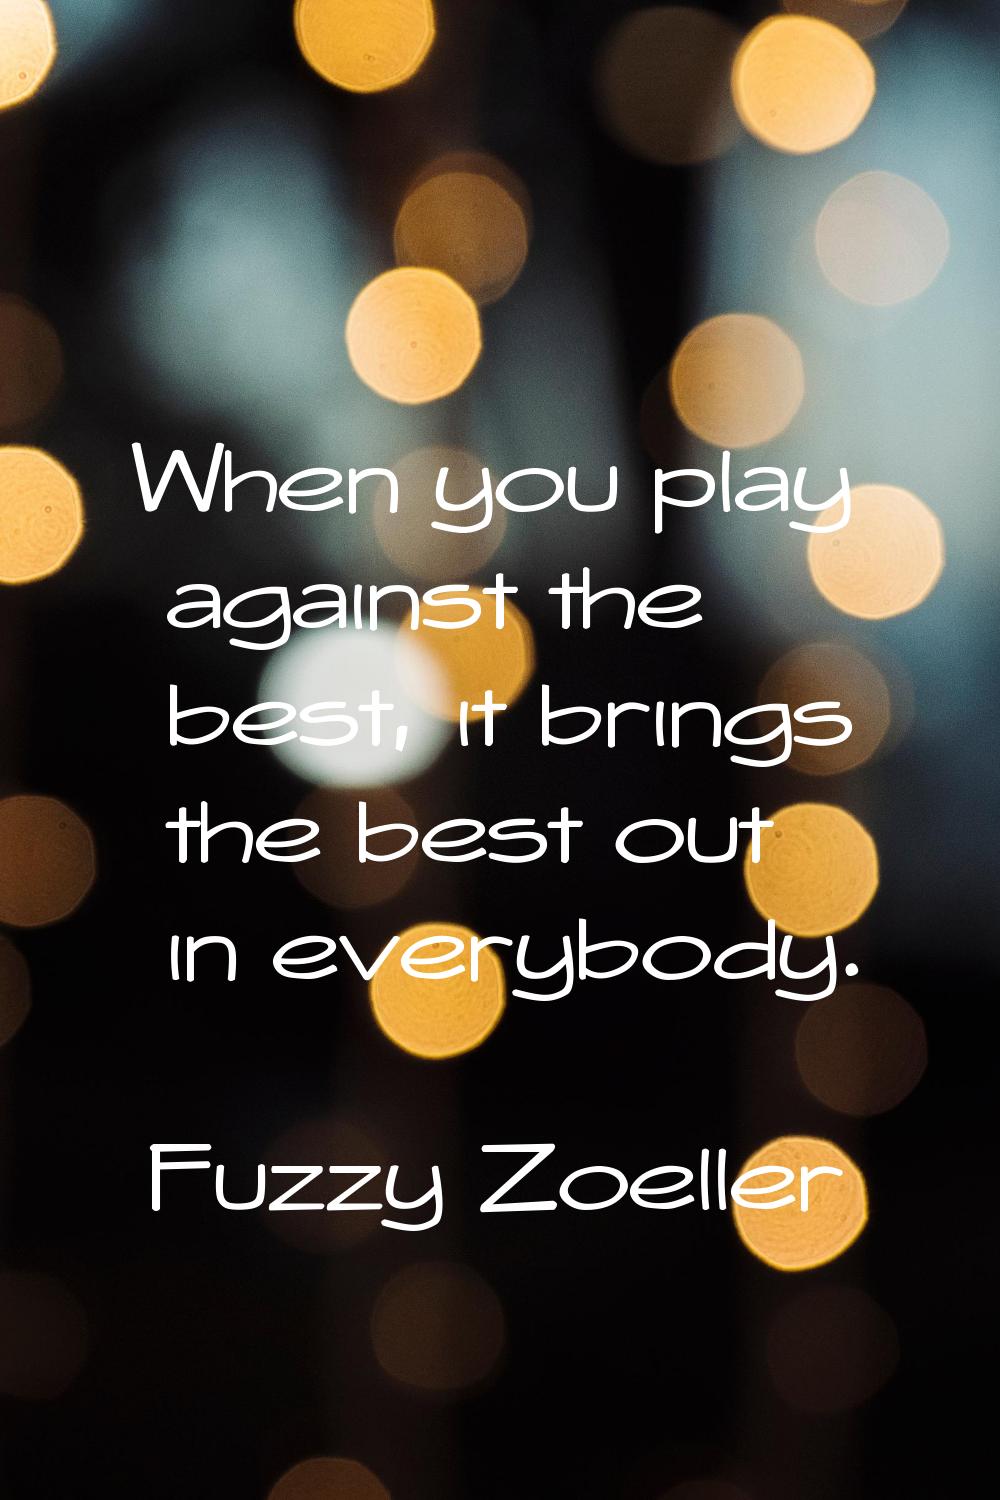 When you play against the best, it brings the best out in everybody.